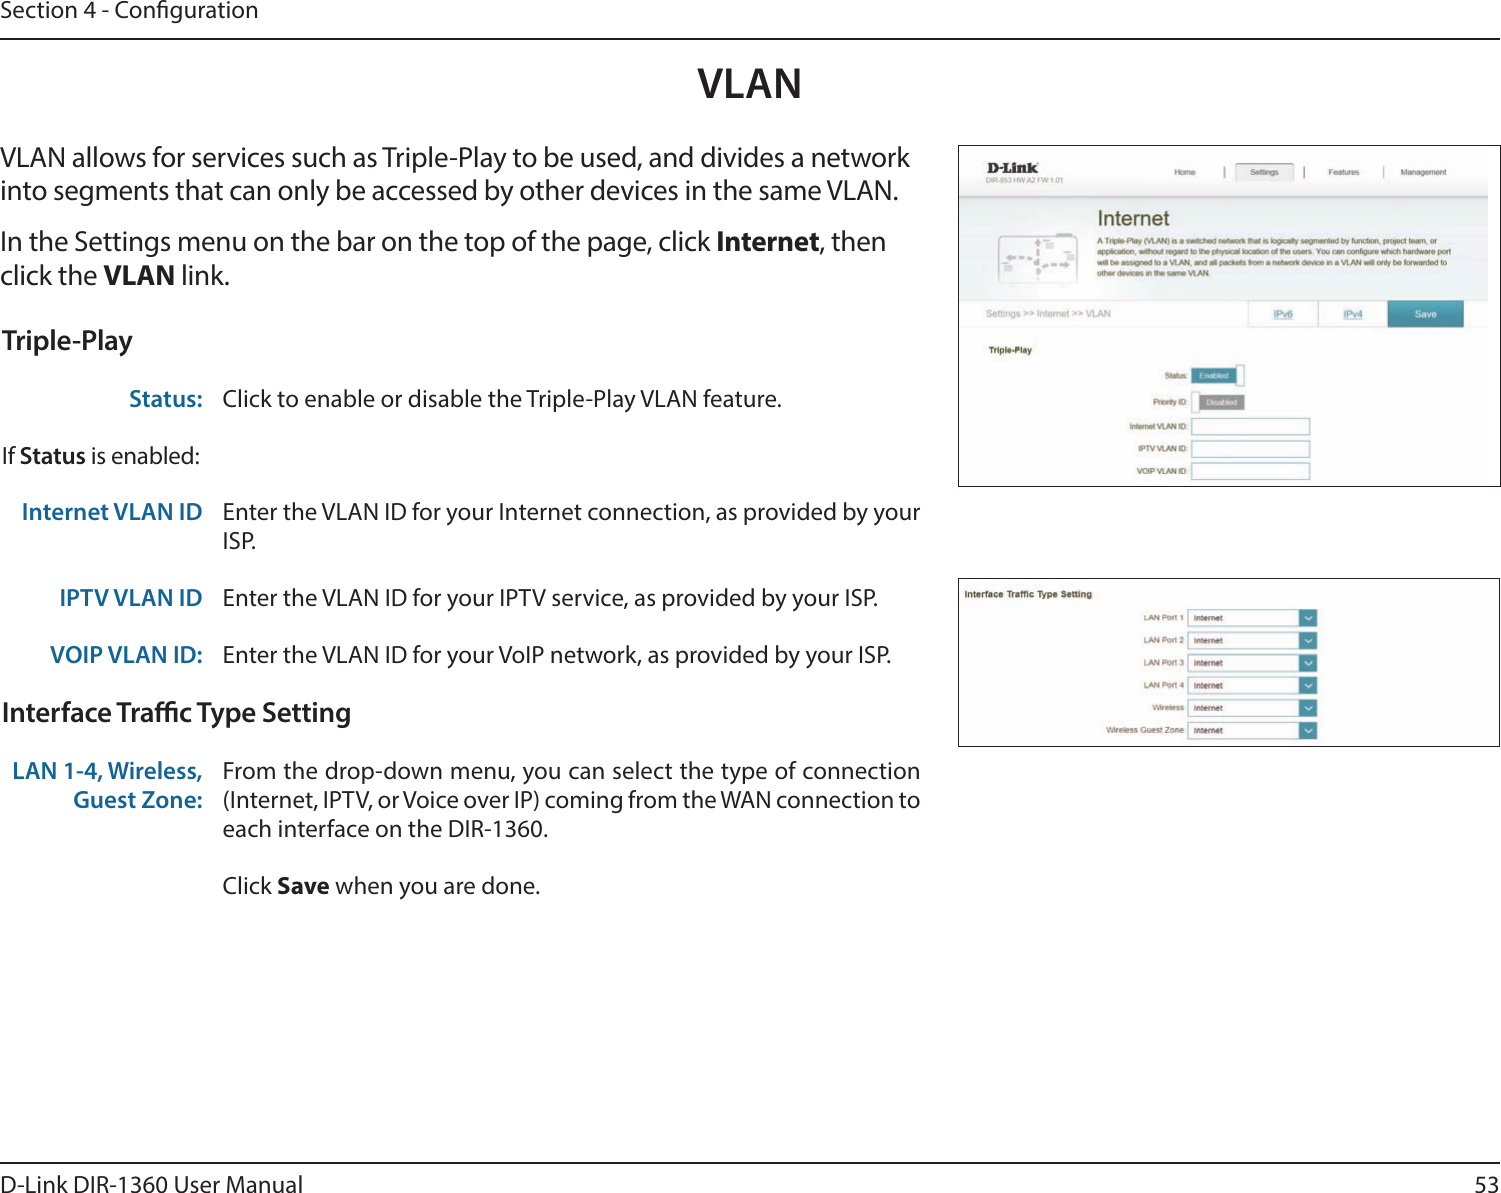 53D-Link DIR-1360 User ManualSection 4 - CongurationVLANVLAN allows for services such as Triple-Play to be used, and divides a network into segments that can only be accessed by other devices in the same VLAN.In the Settings menu on the bar on the top of the page, click Internet, then click the VLAN link. Triple-PlayStatus: Click to enable or disable the Triple-Play VLAN feature. If Status is enabled:Internet VLAN ID Enter the VLAN ID for your Internet connection, as provided by your ISP.IPTV VLAN ID Enter the VLAN ID for your IPTV service, as provided by your ISP. VOIP VLAN ID: Enter the VLAN ID for your VoIP network, as provided by your ISP. Interface Trac Type SettingLAN 1-4, Wireless, Guest Zone:From the drop-down menu, you can select the type of connection (Internet, IPTV, or Voice over IP) coming from the WAN connection to each interface on the DIR-1360.Click Save when you are done.